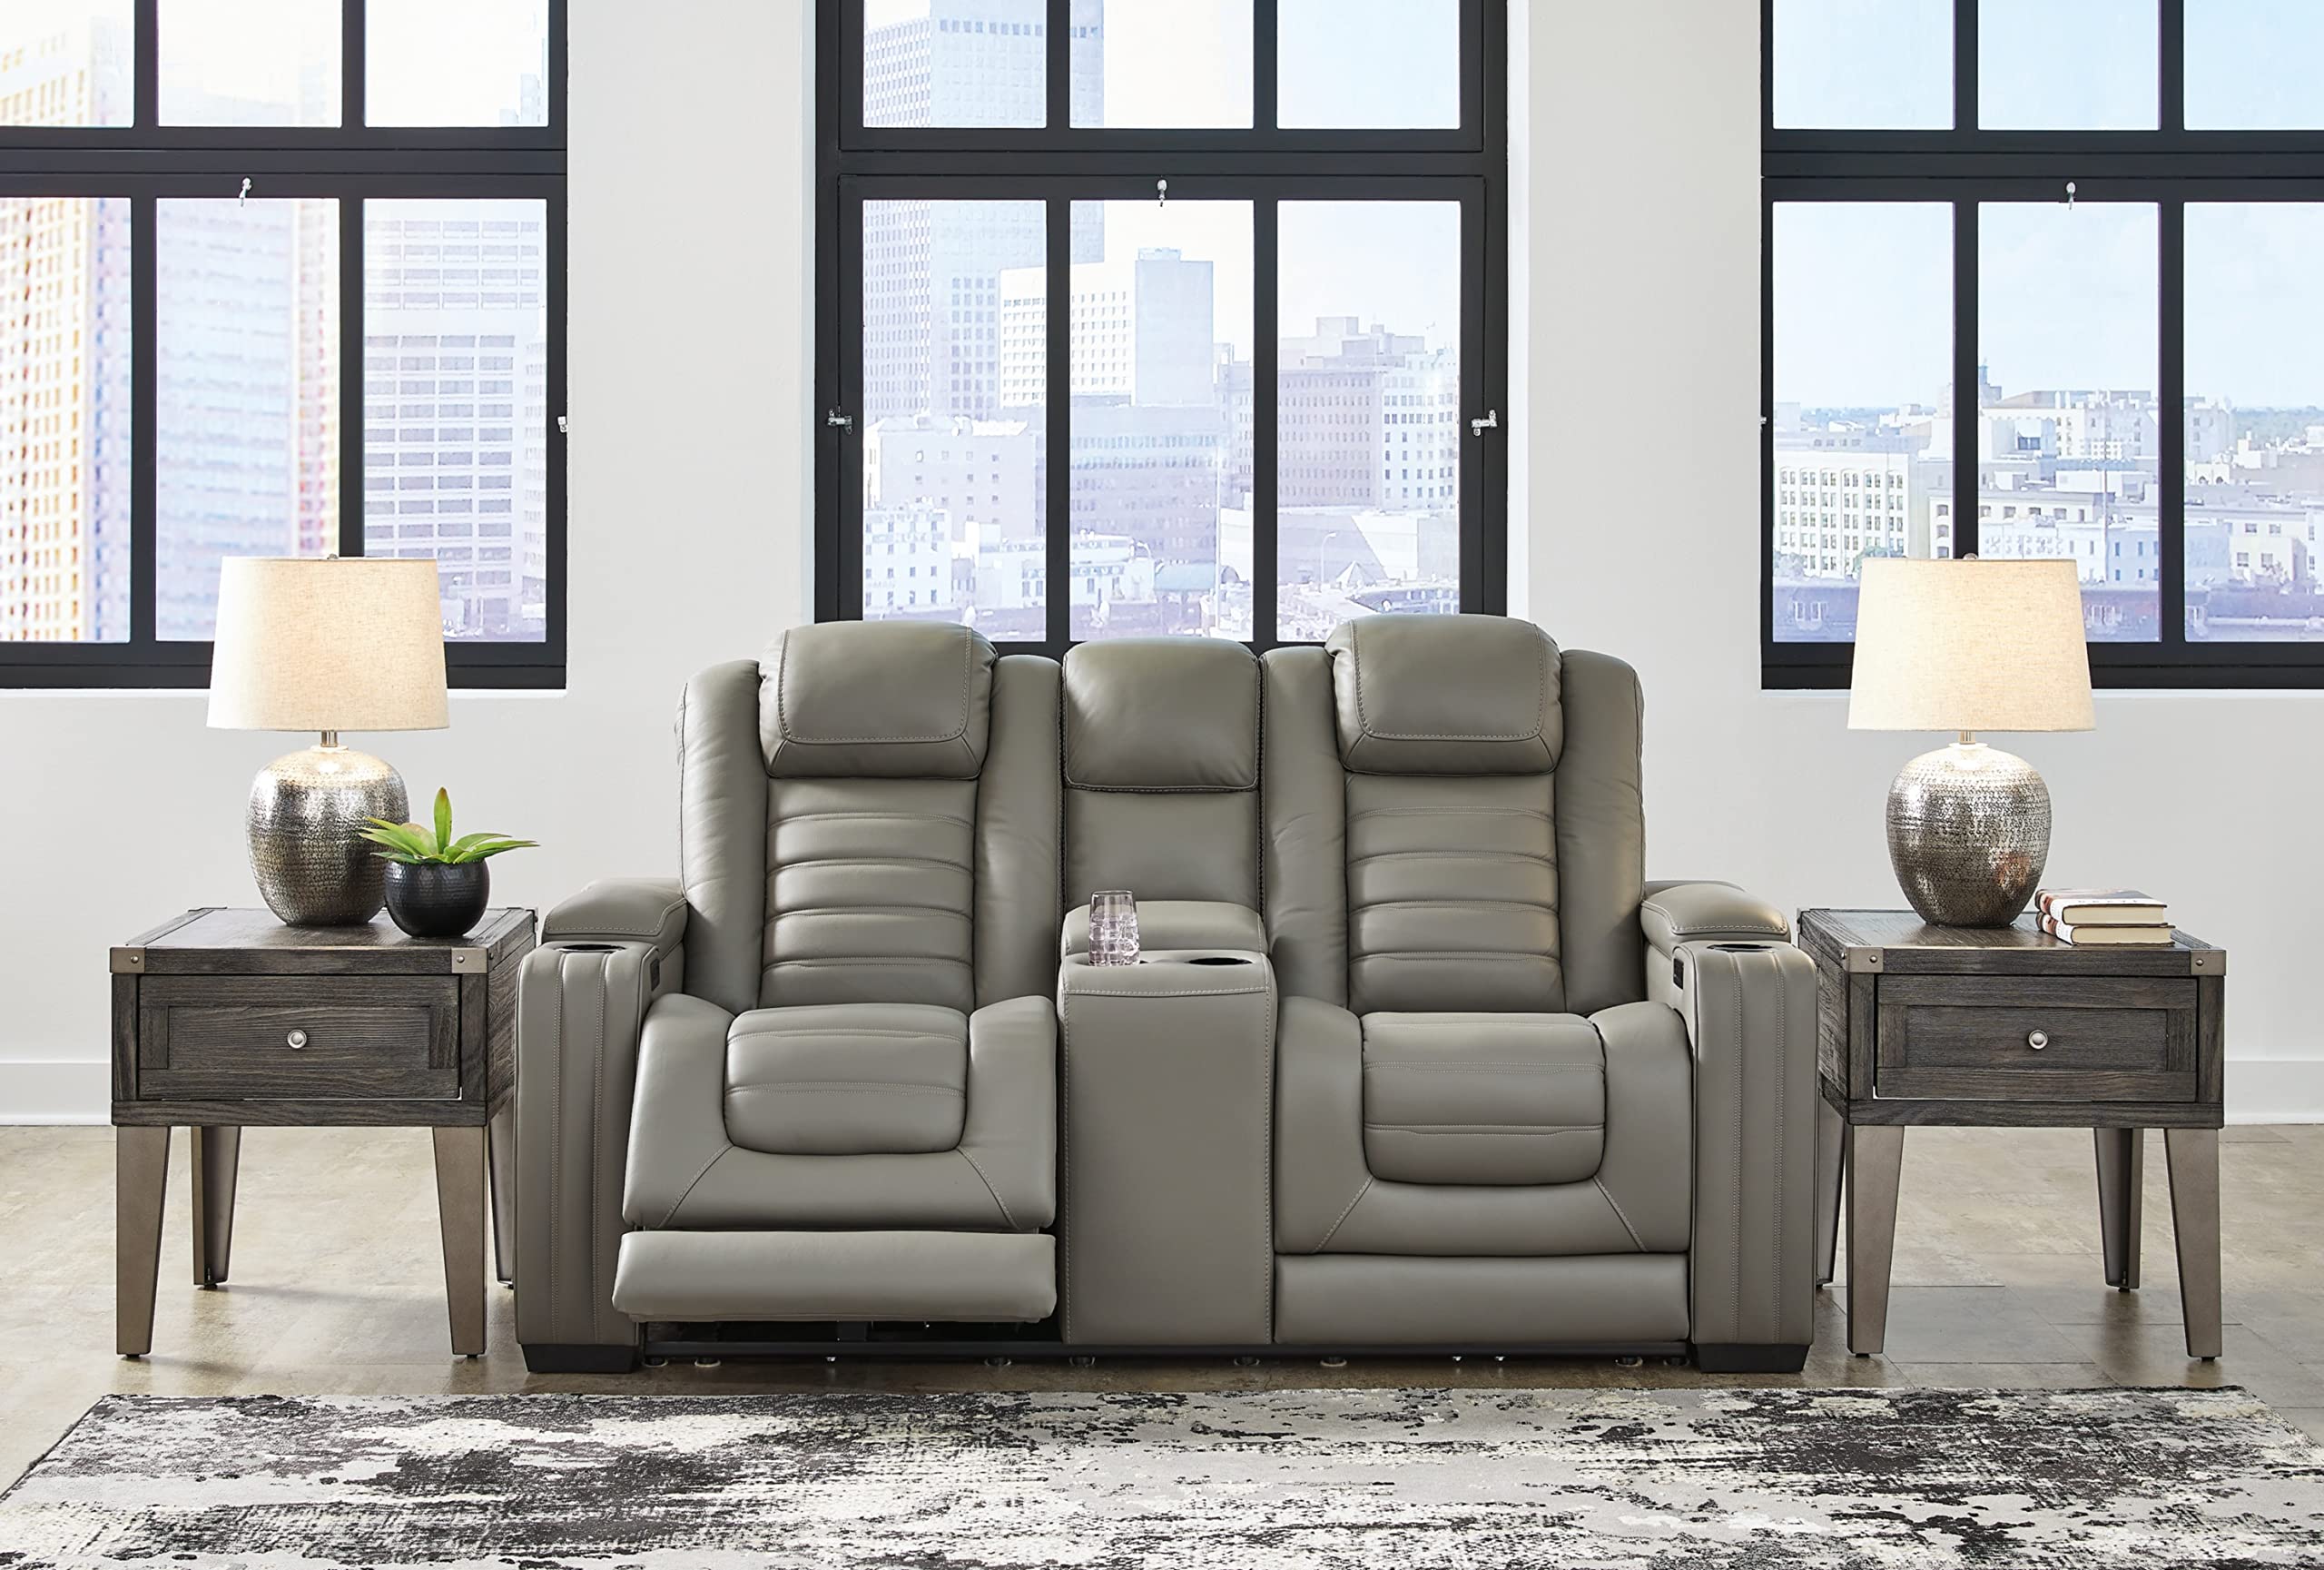 Signature Design by Ashley Backtrack Contemporary Tufted Leather Power Reclining Loveseat with Console and Adjustable Headrest, Light Gray